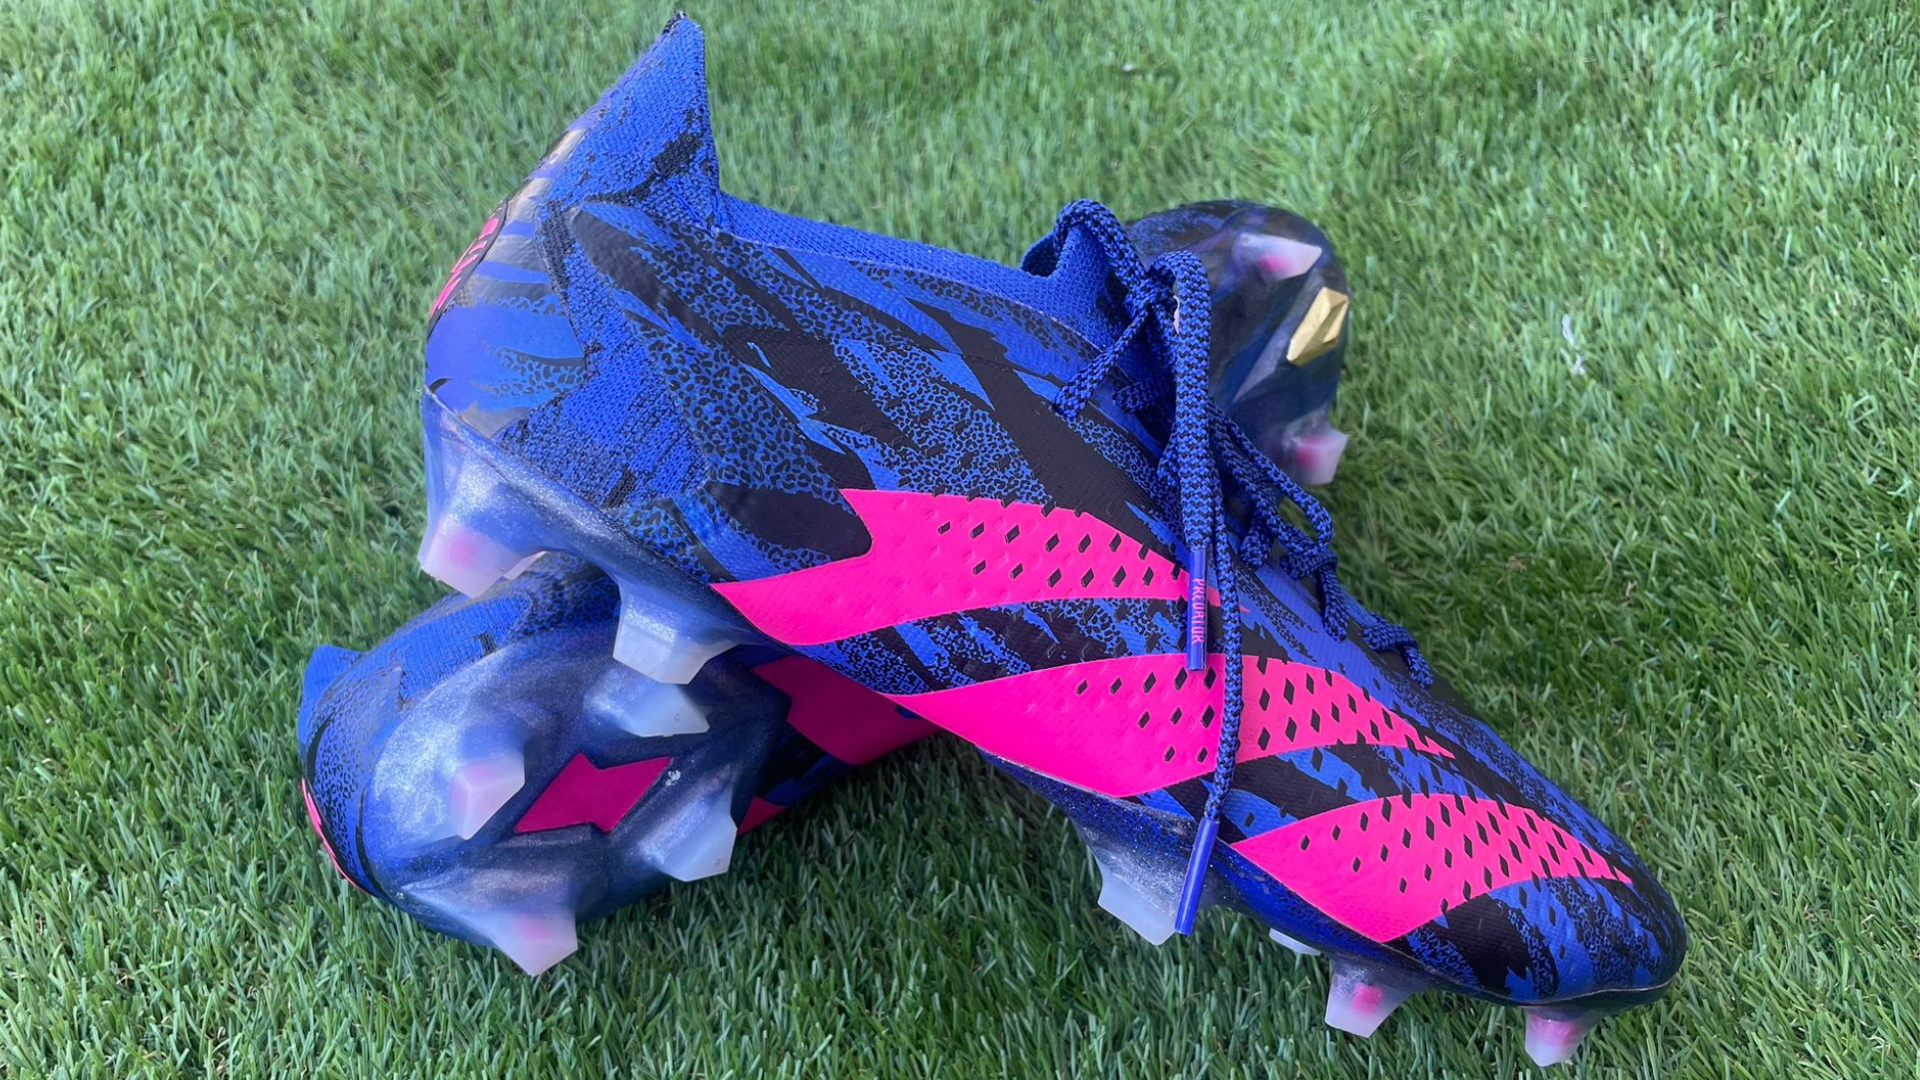 adidas Predator Accuracy+ FG cleats: Our tried & tested review